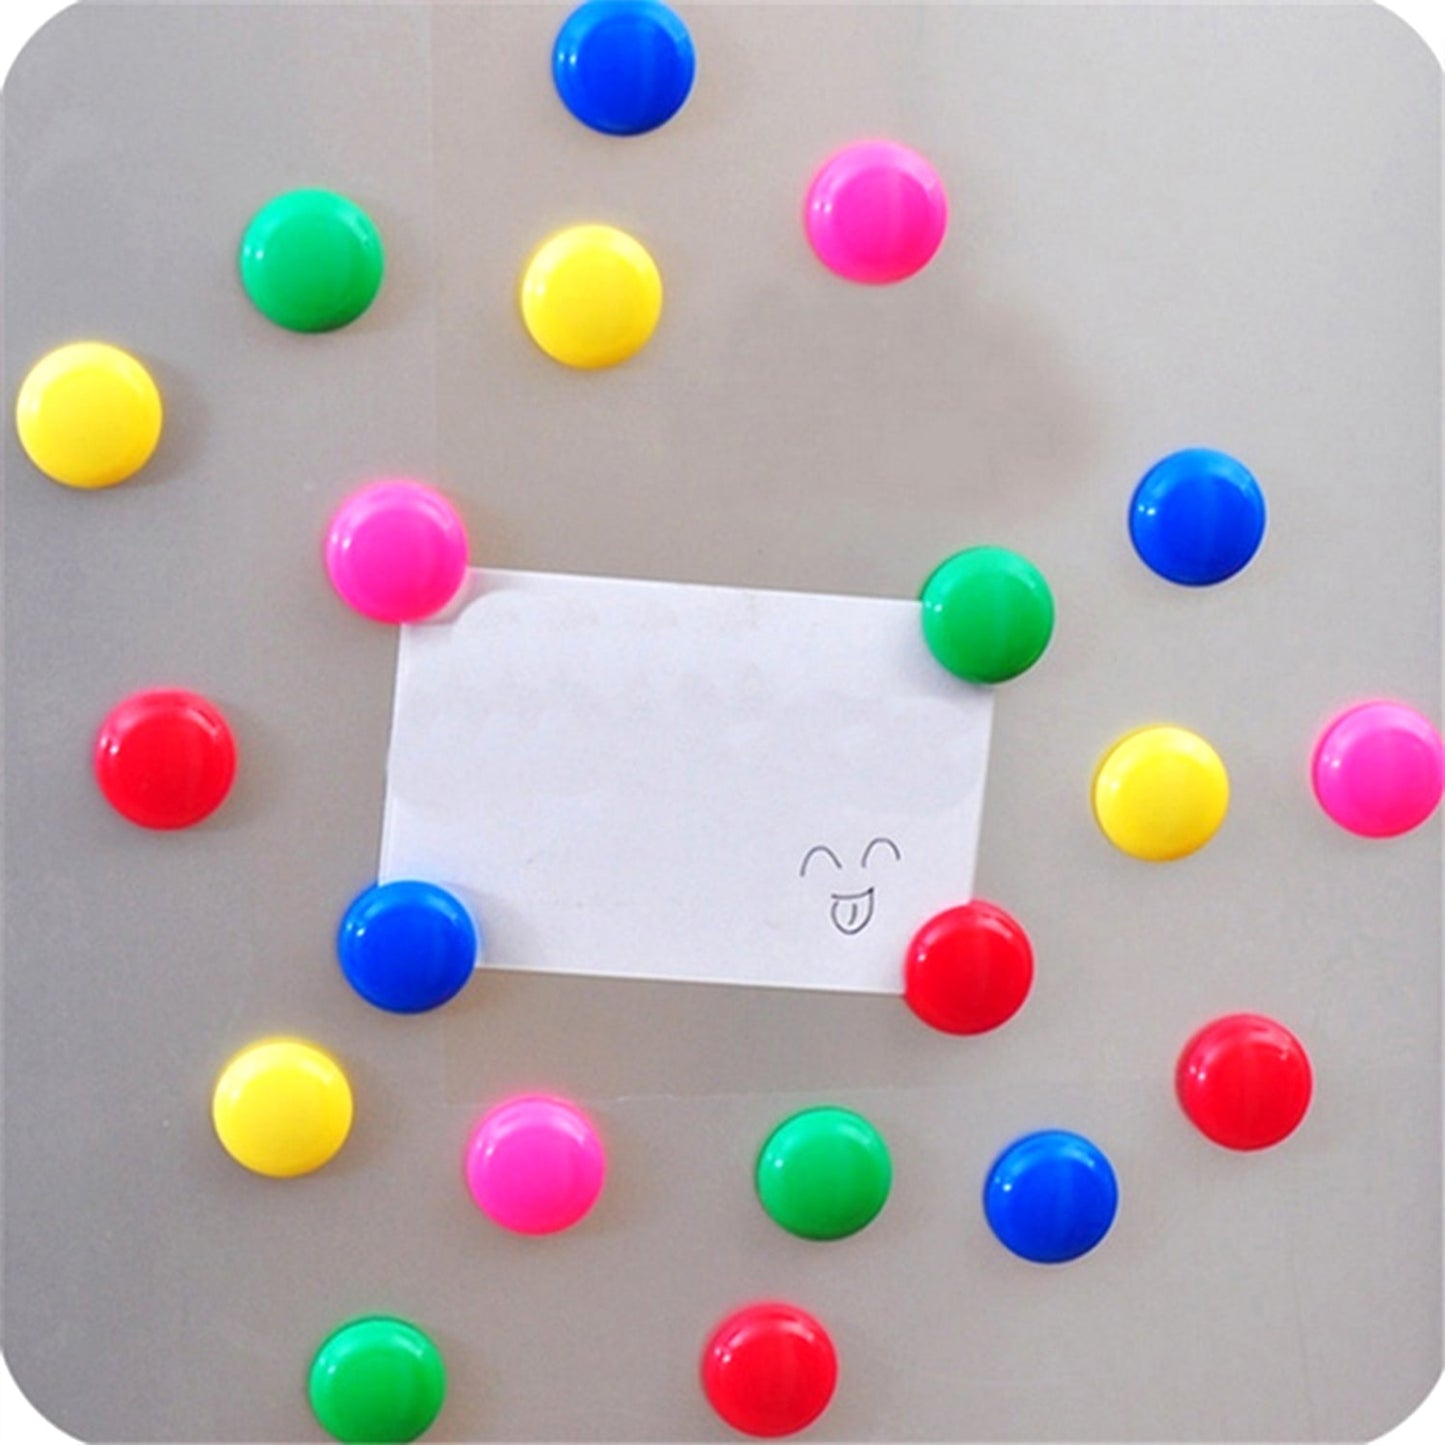 Colorful Board Magnets Circular Plastic Buttons